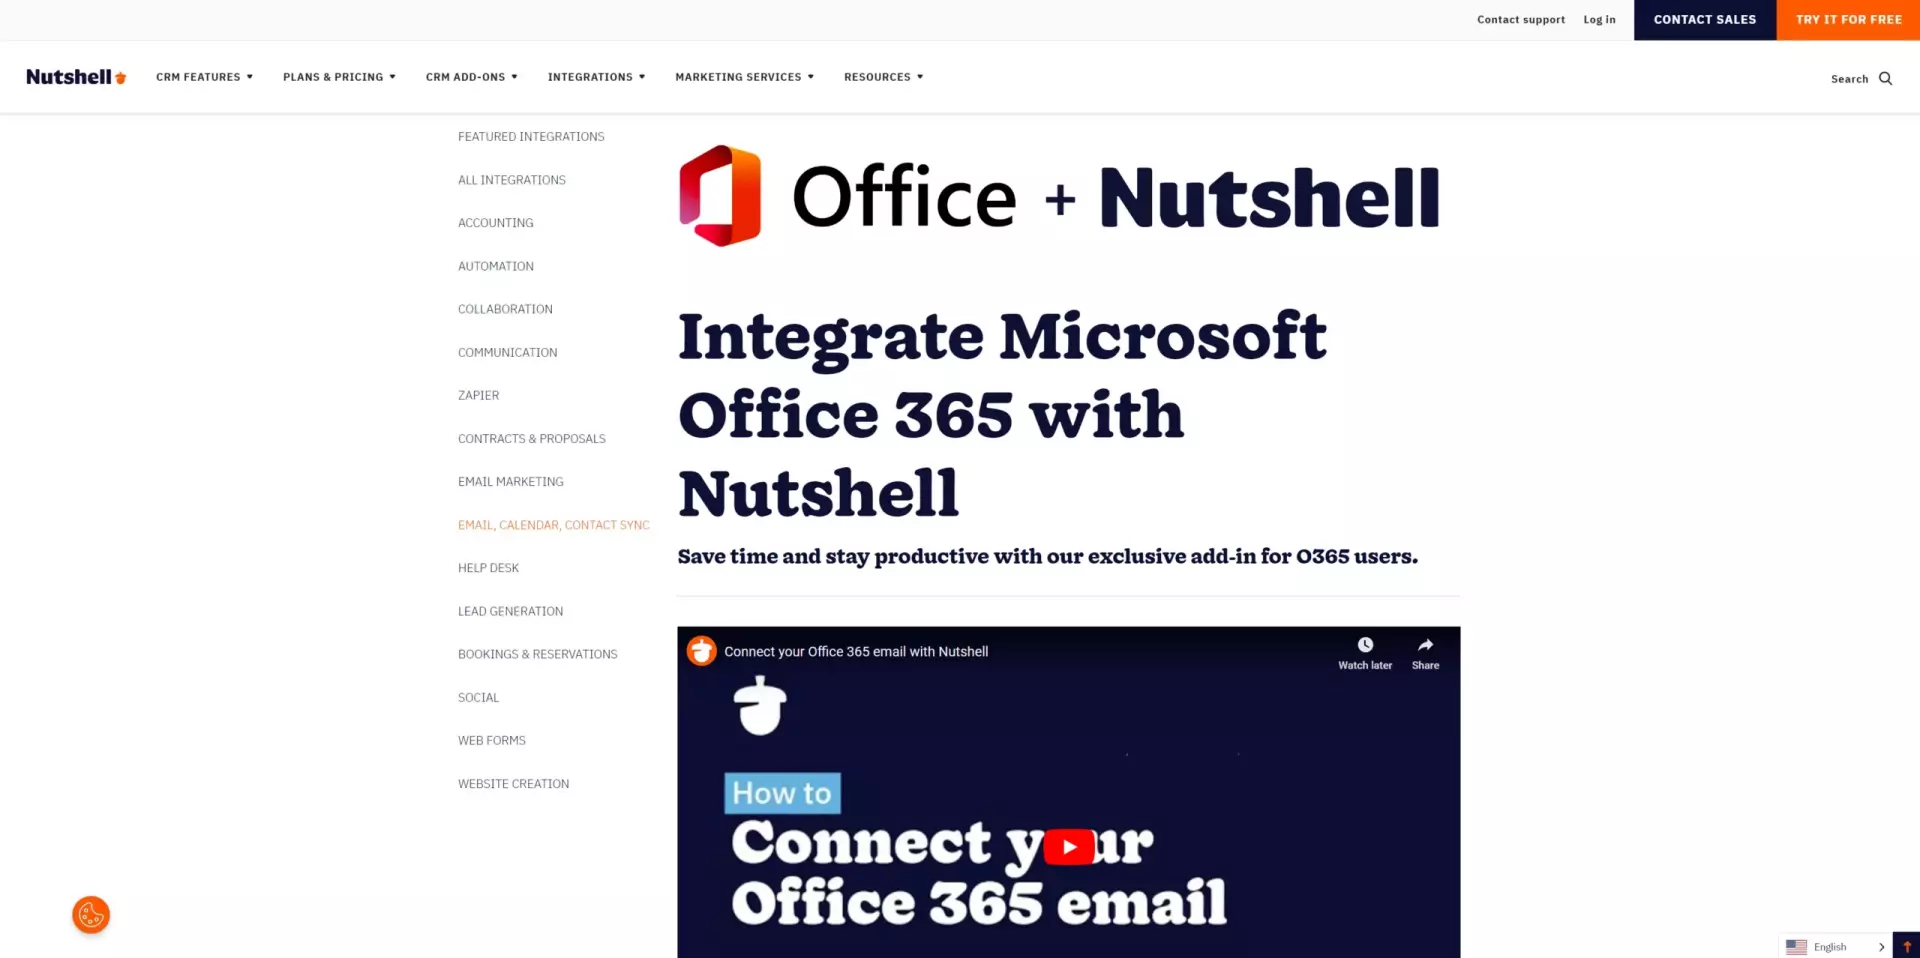 Microsoft Office and Nutshell integration